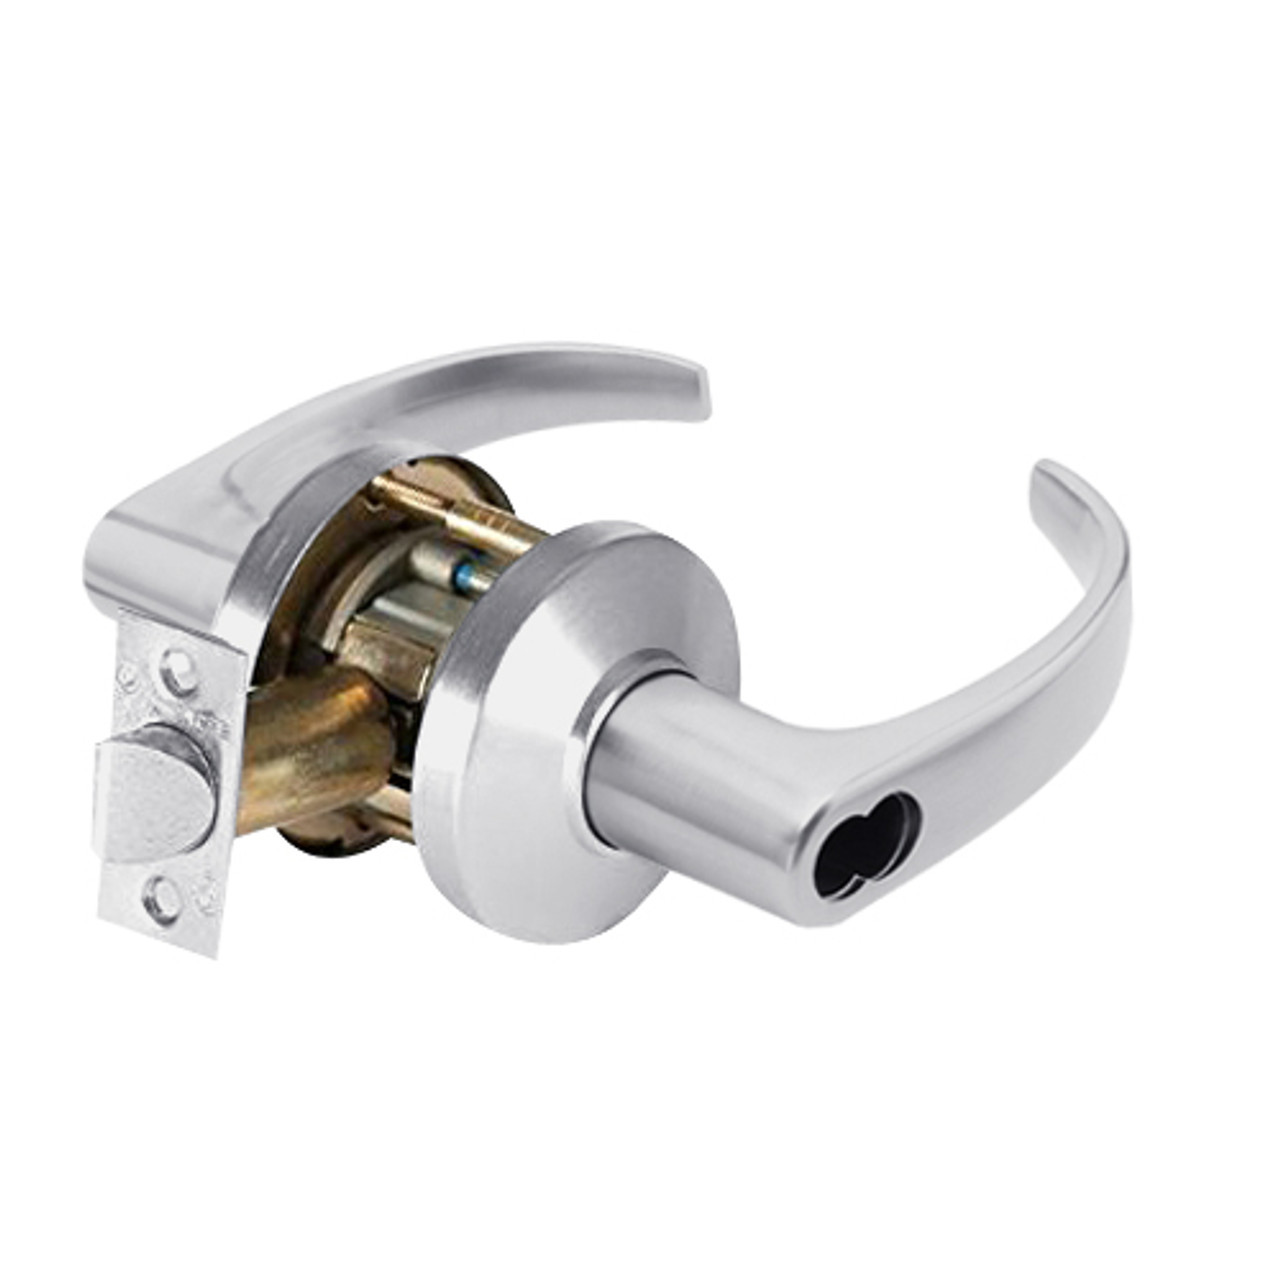 9K37YR14CS3626LM Best 9K Series Special Function Cylindrical Lever Locks with Curved with Return Lever Design Accept 7 Pin Best Core in Satin Chrome